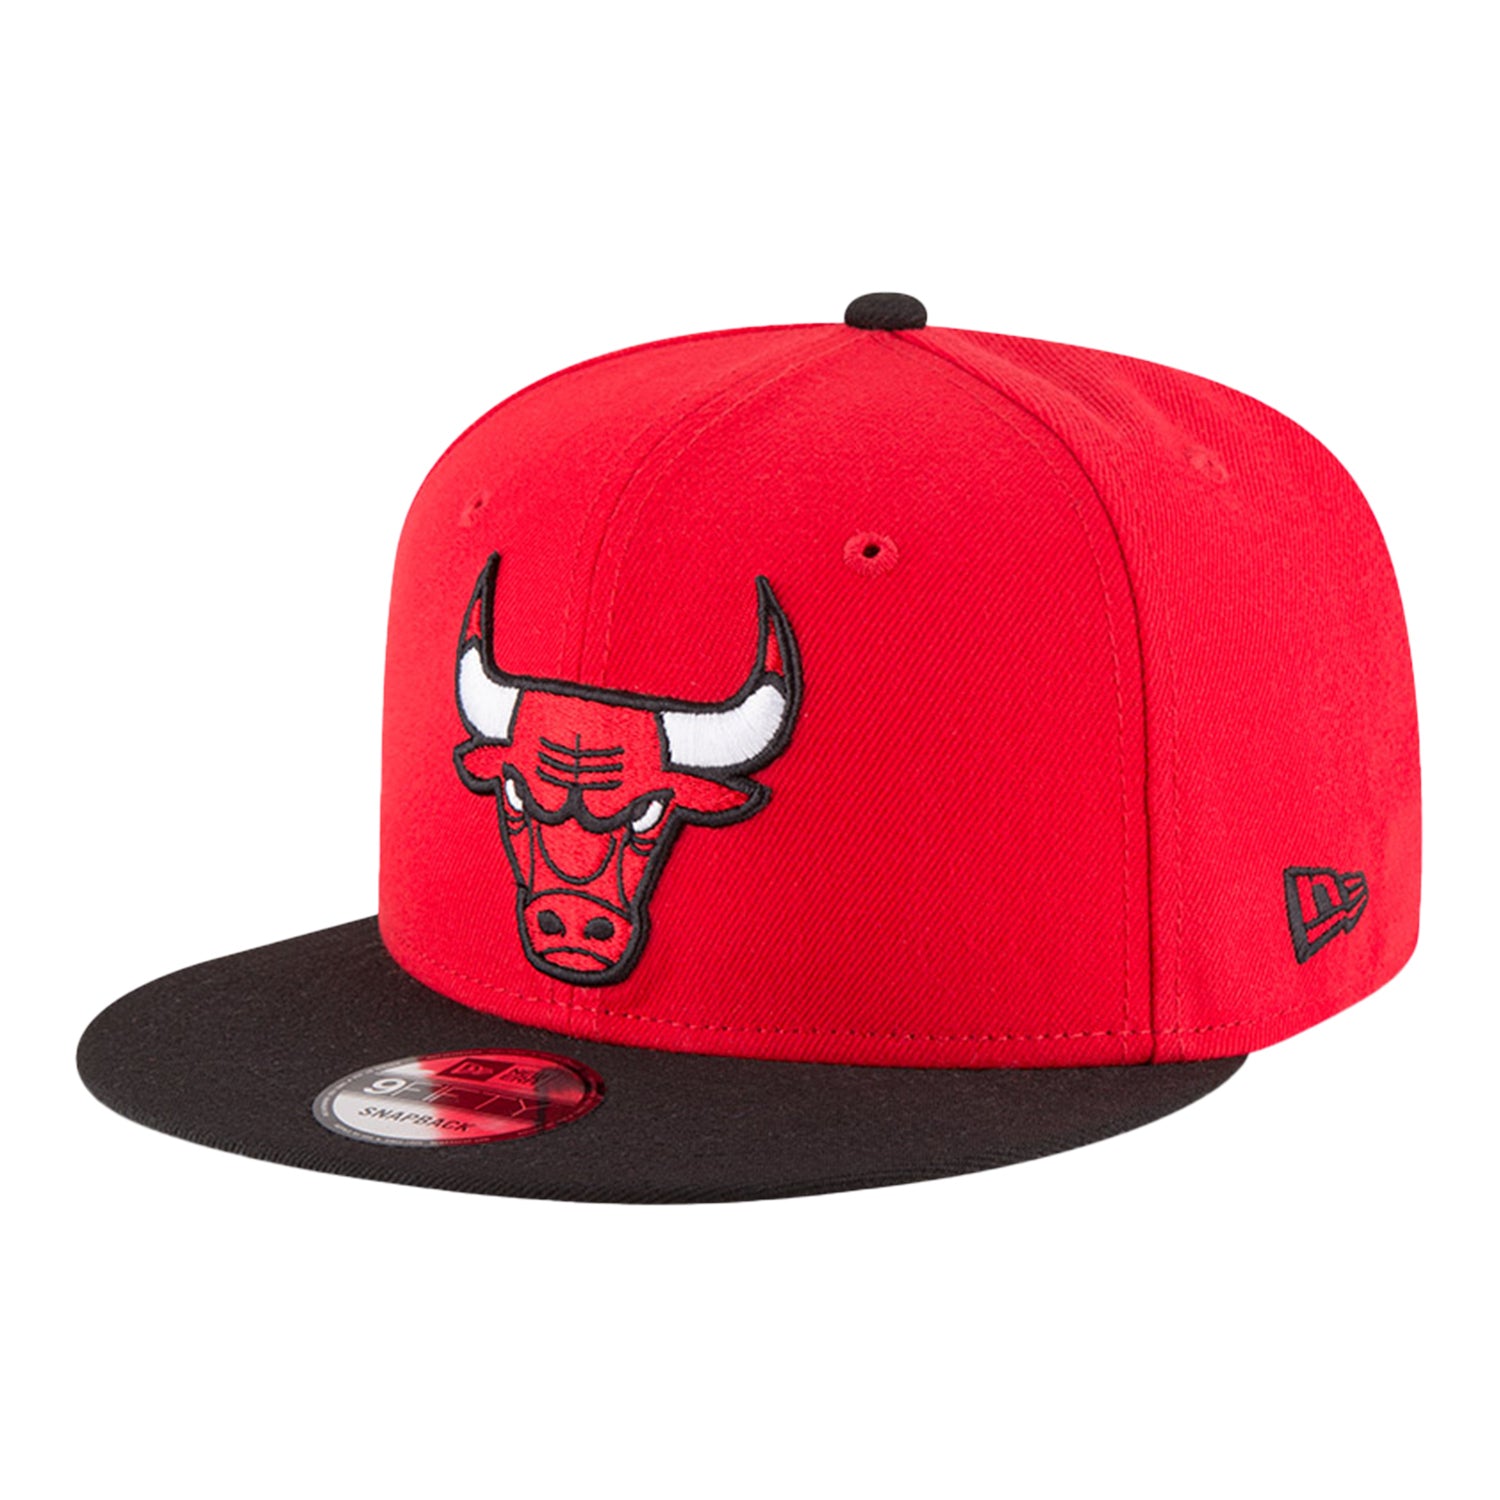 Official Chicago Bulls Hats, Snapbacks, Fitted Hats, Beanies